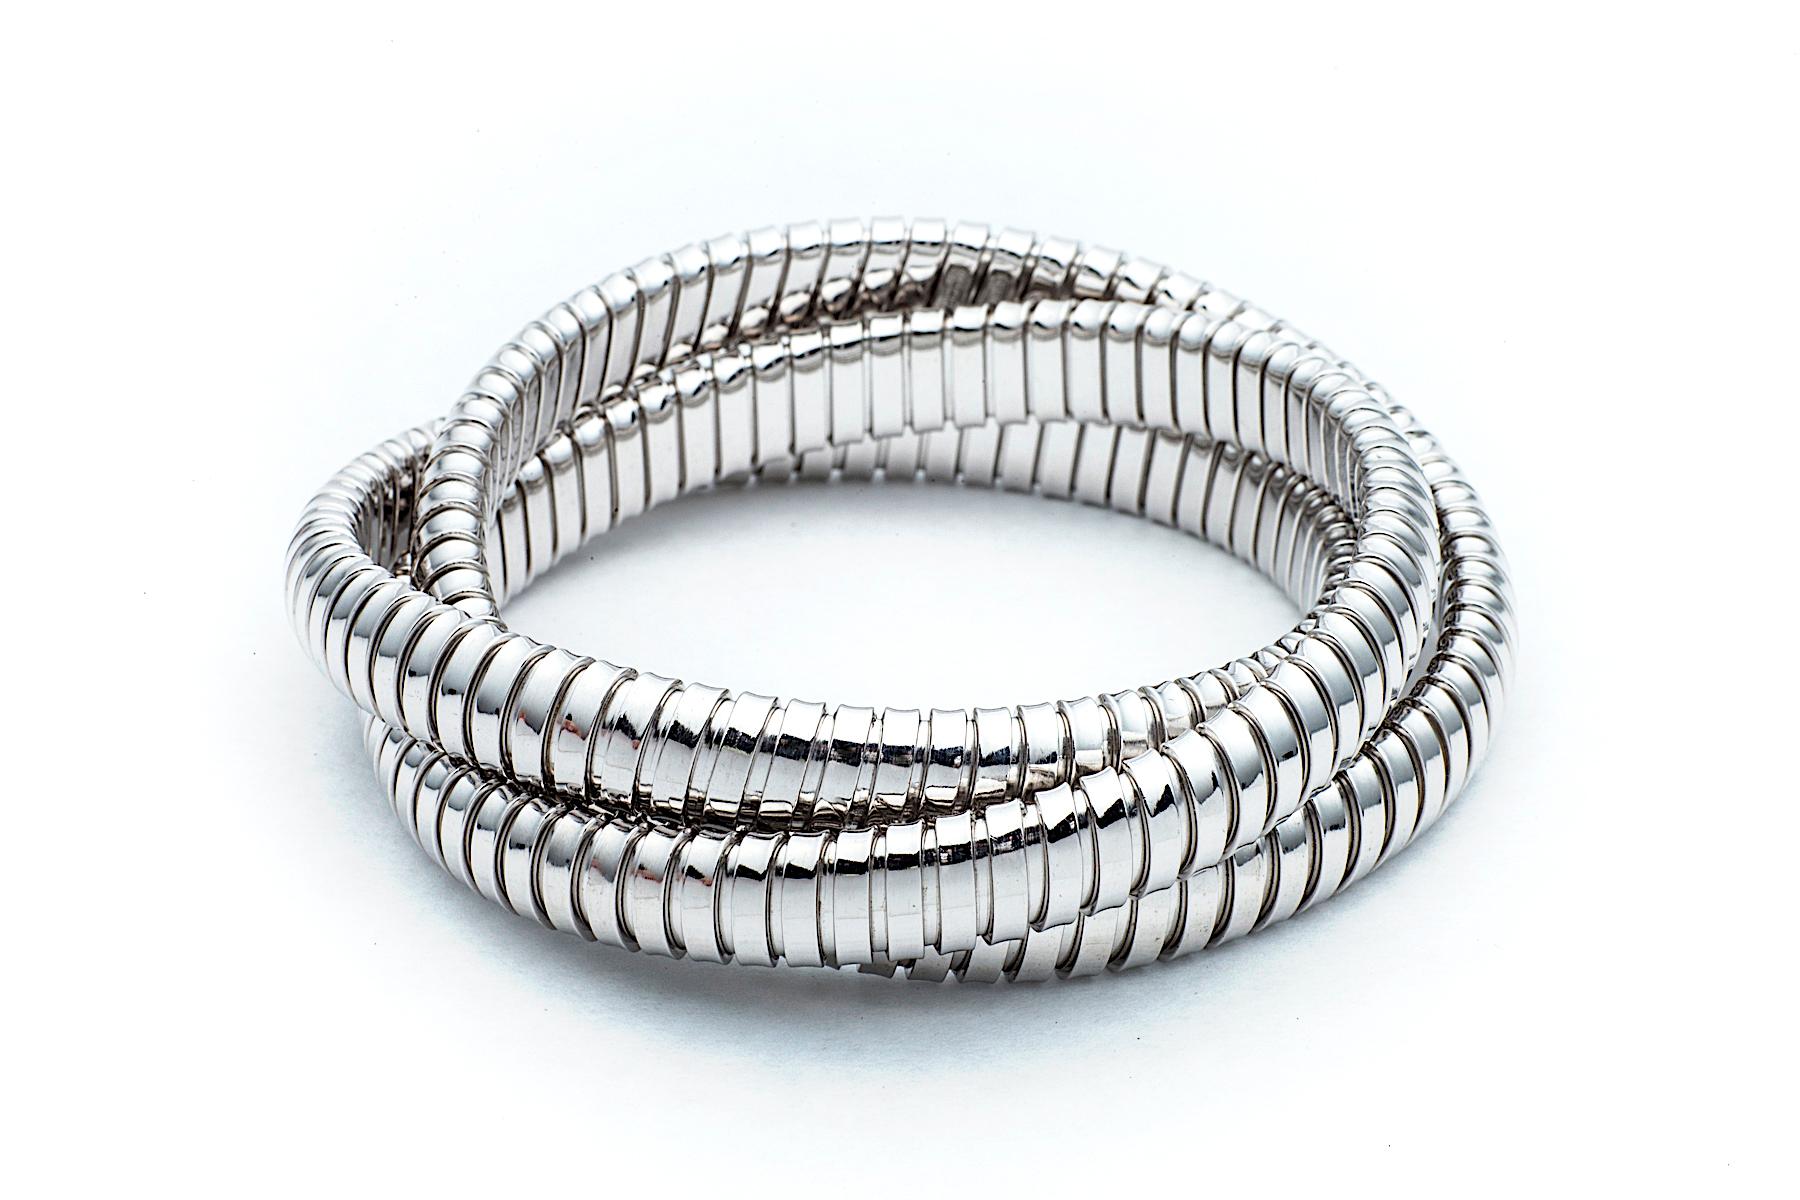 With a timeless but modern style, this chic intertwined 9mm three strand tubogas rolling bangle bracelet was originally inspired by the flexible automotive gas tubing of the 1920’s.  Translated into sterling silver and easily stacked with other